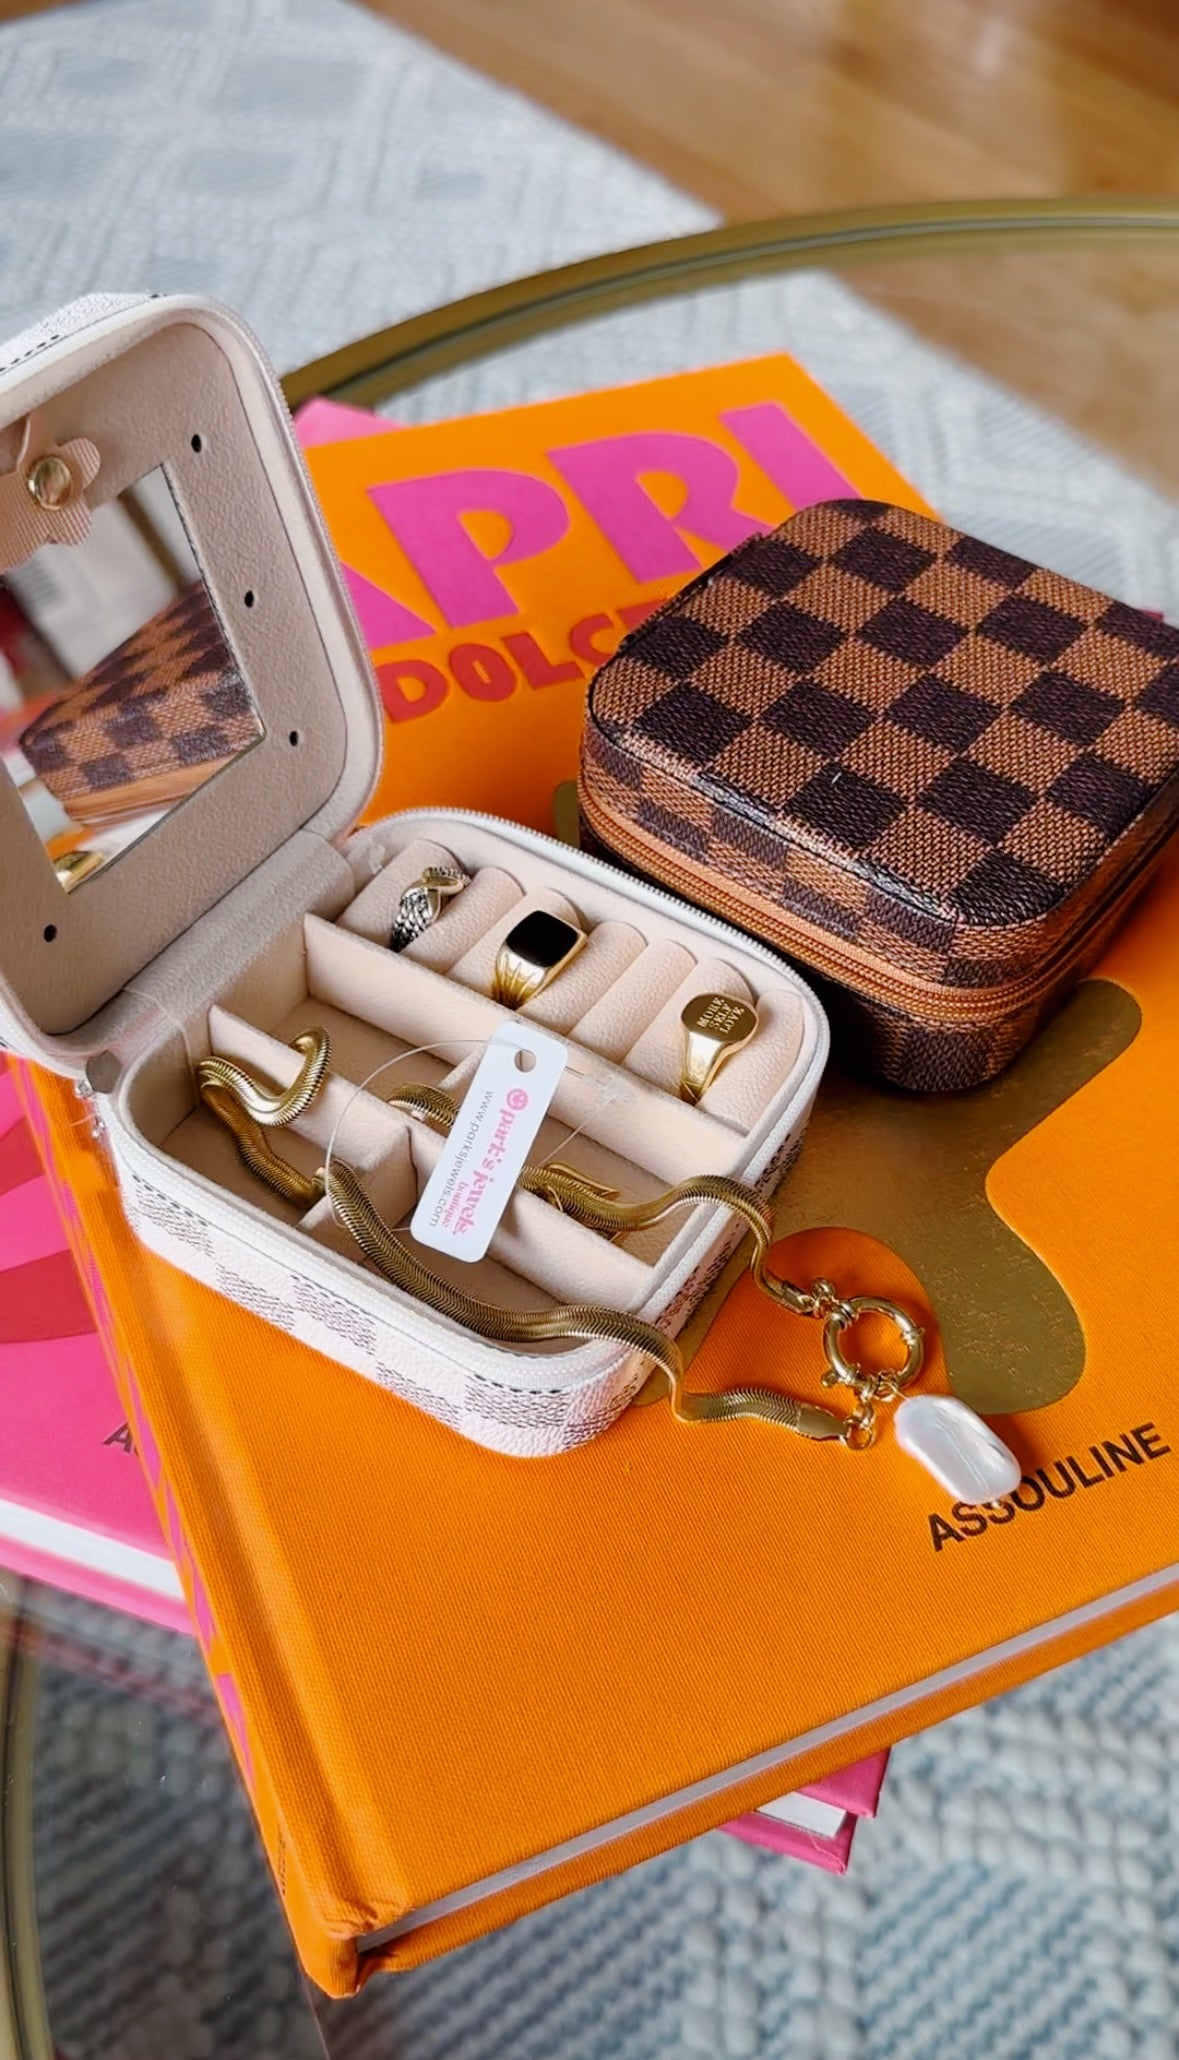 Checkered Travel Jewelry Boxes